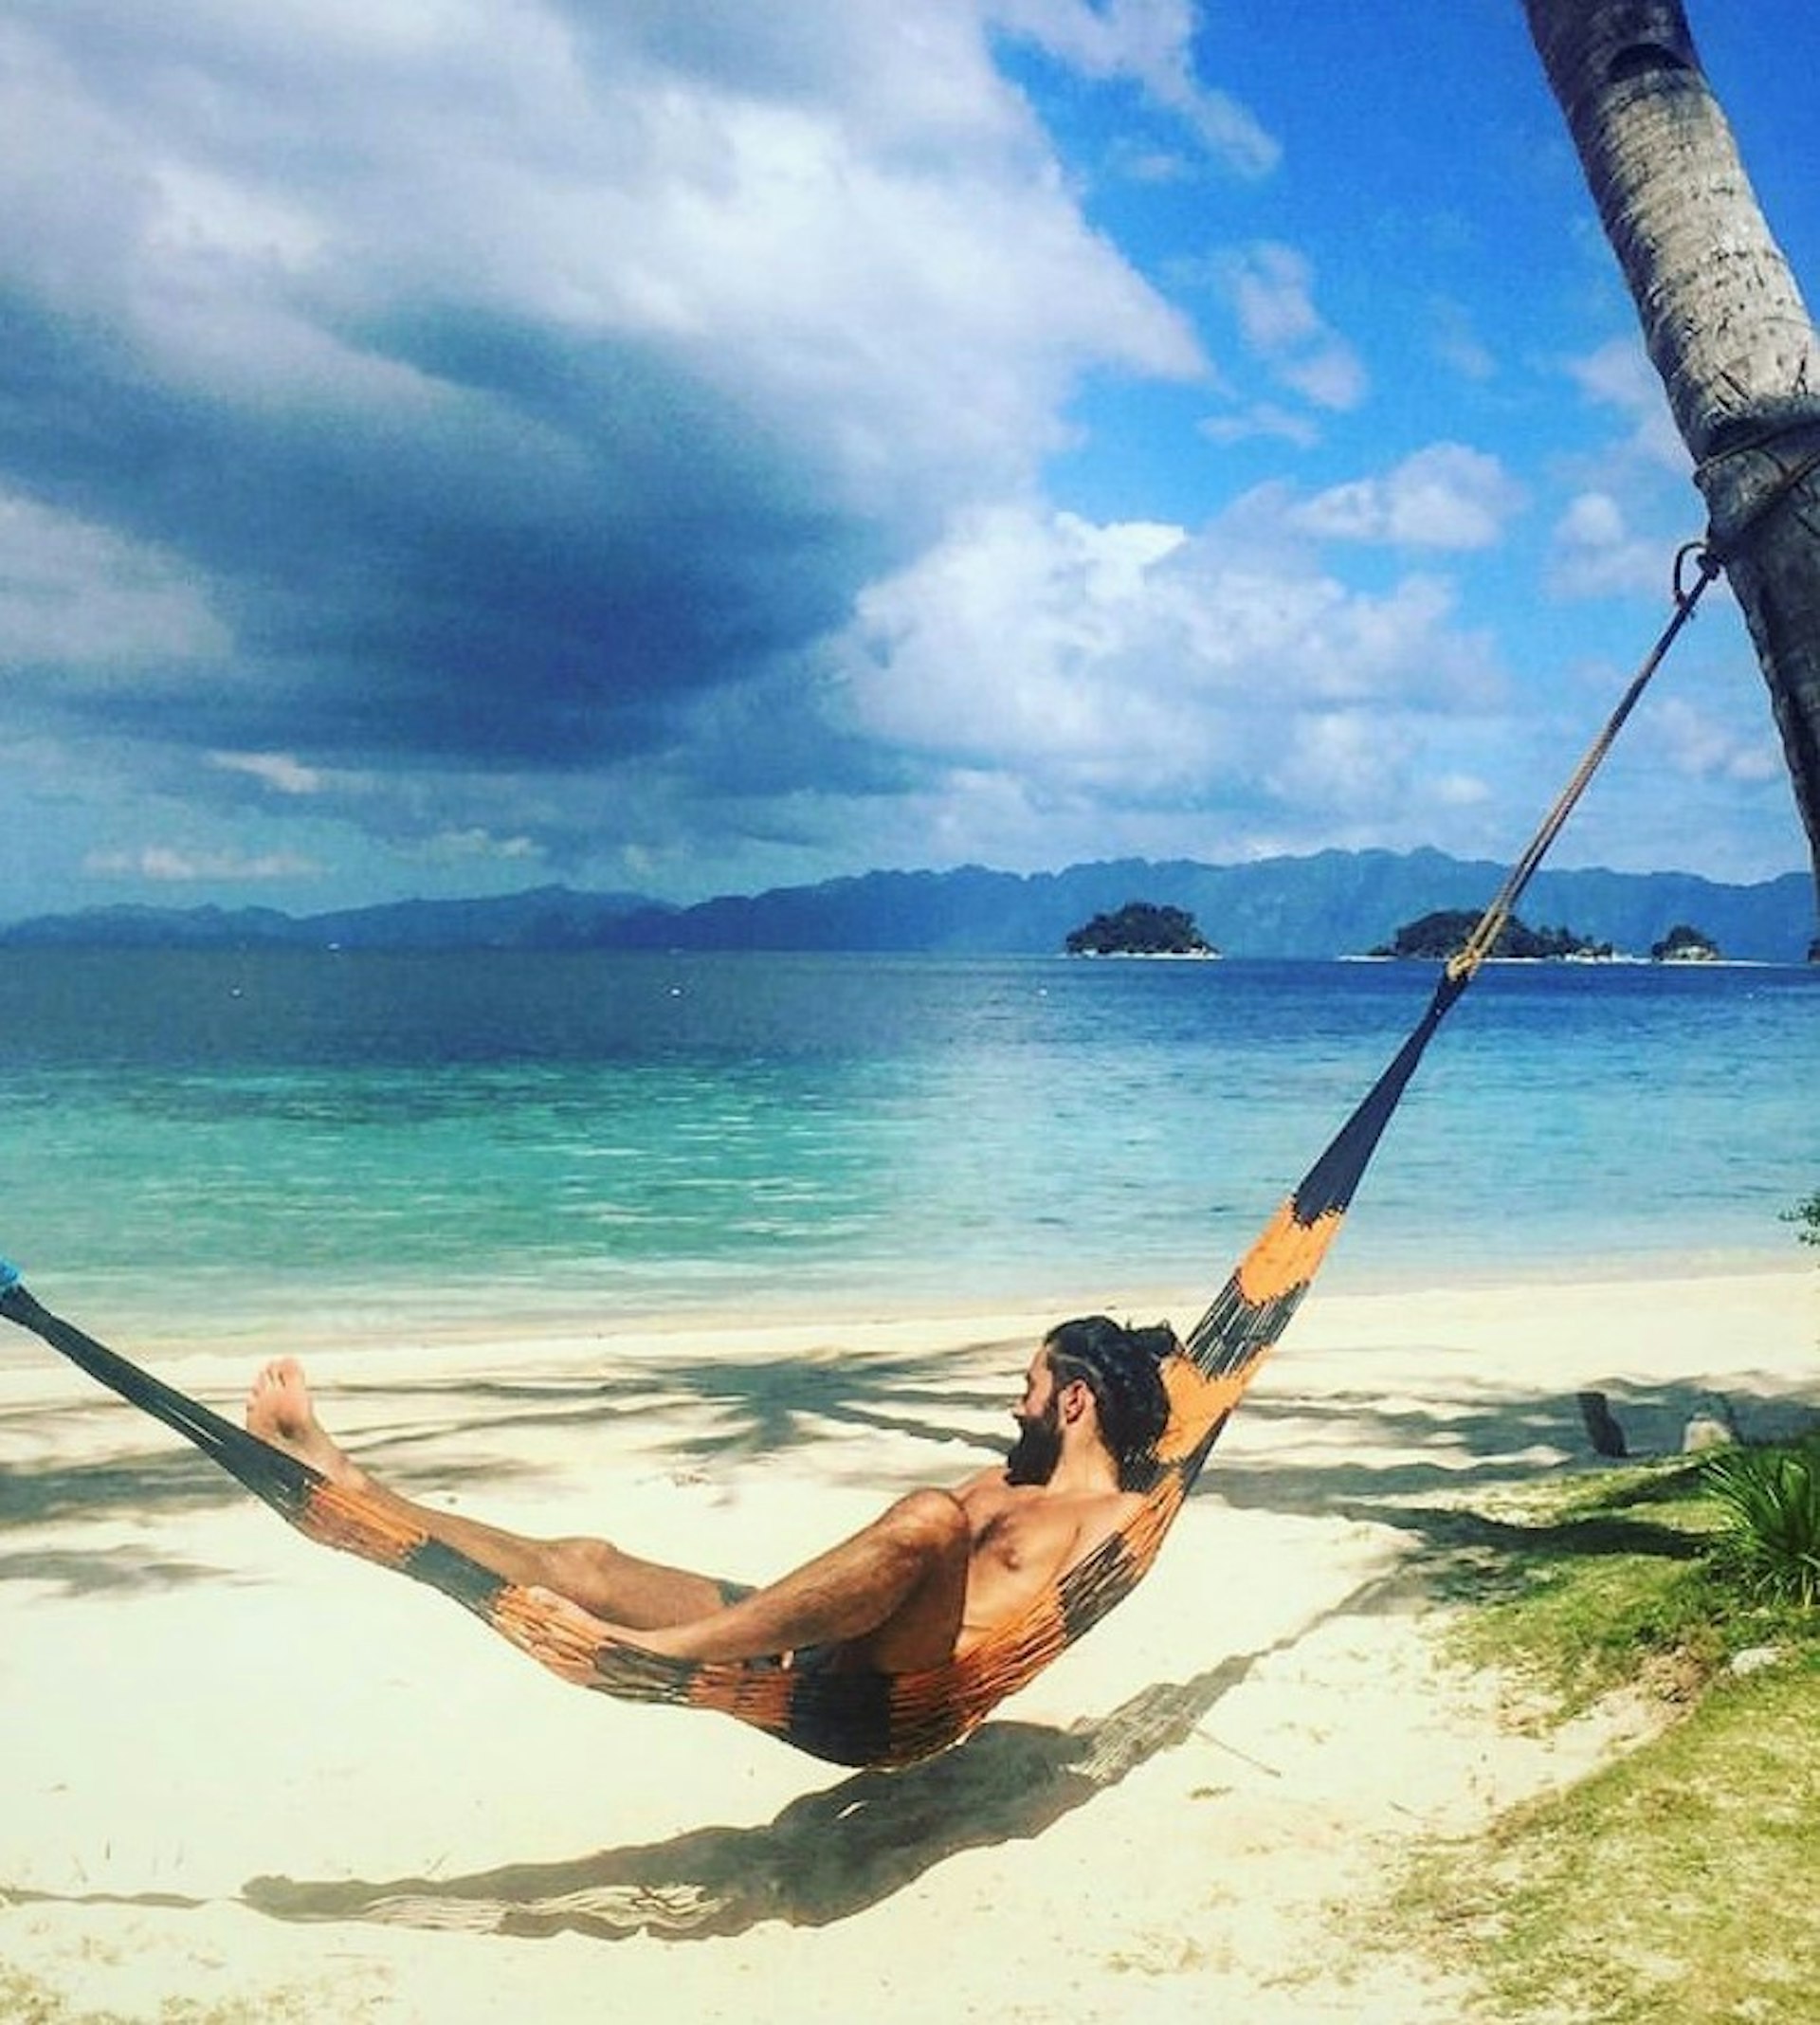 A man lies in a hammock slung between palm trees. He is looking out at the clear, calm, turquoise sea